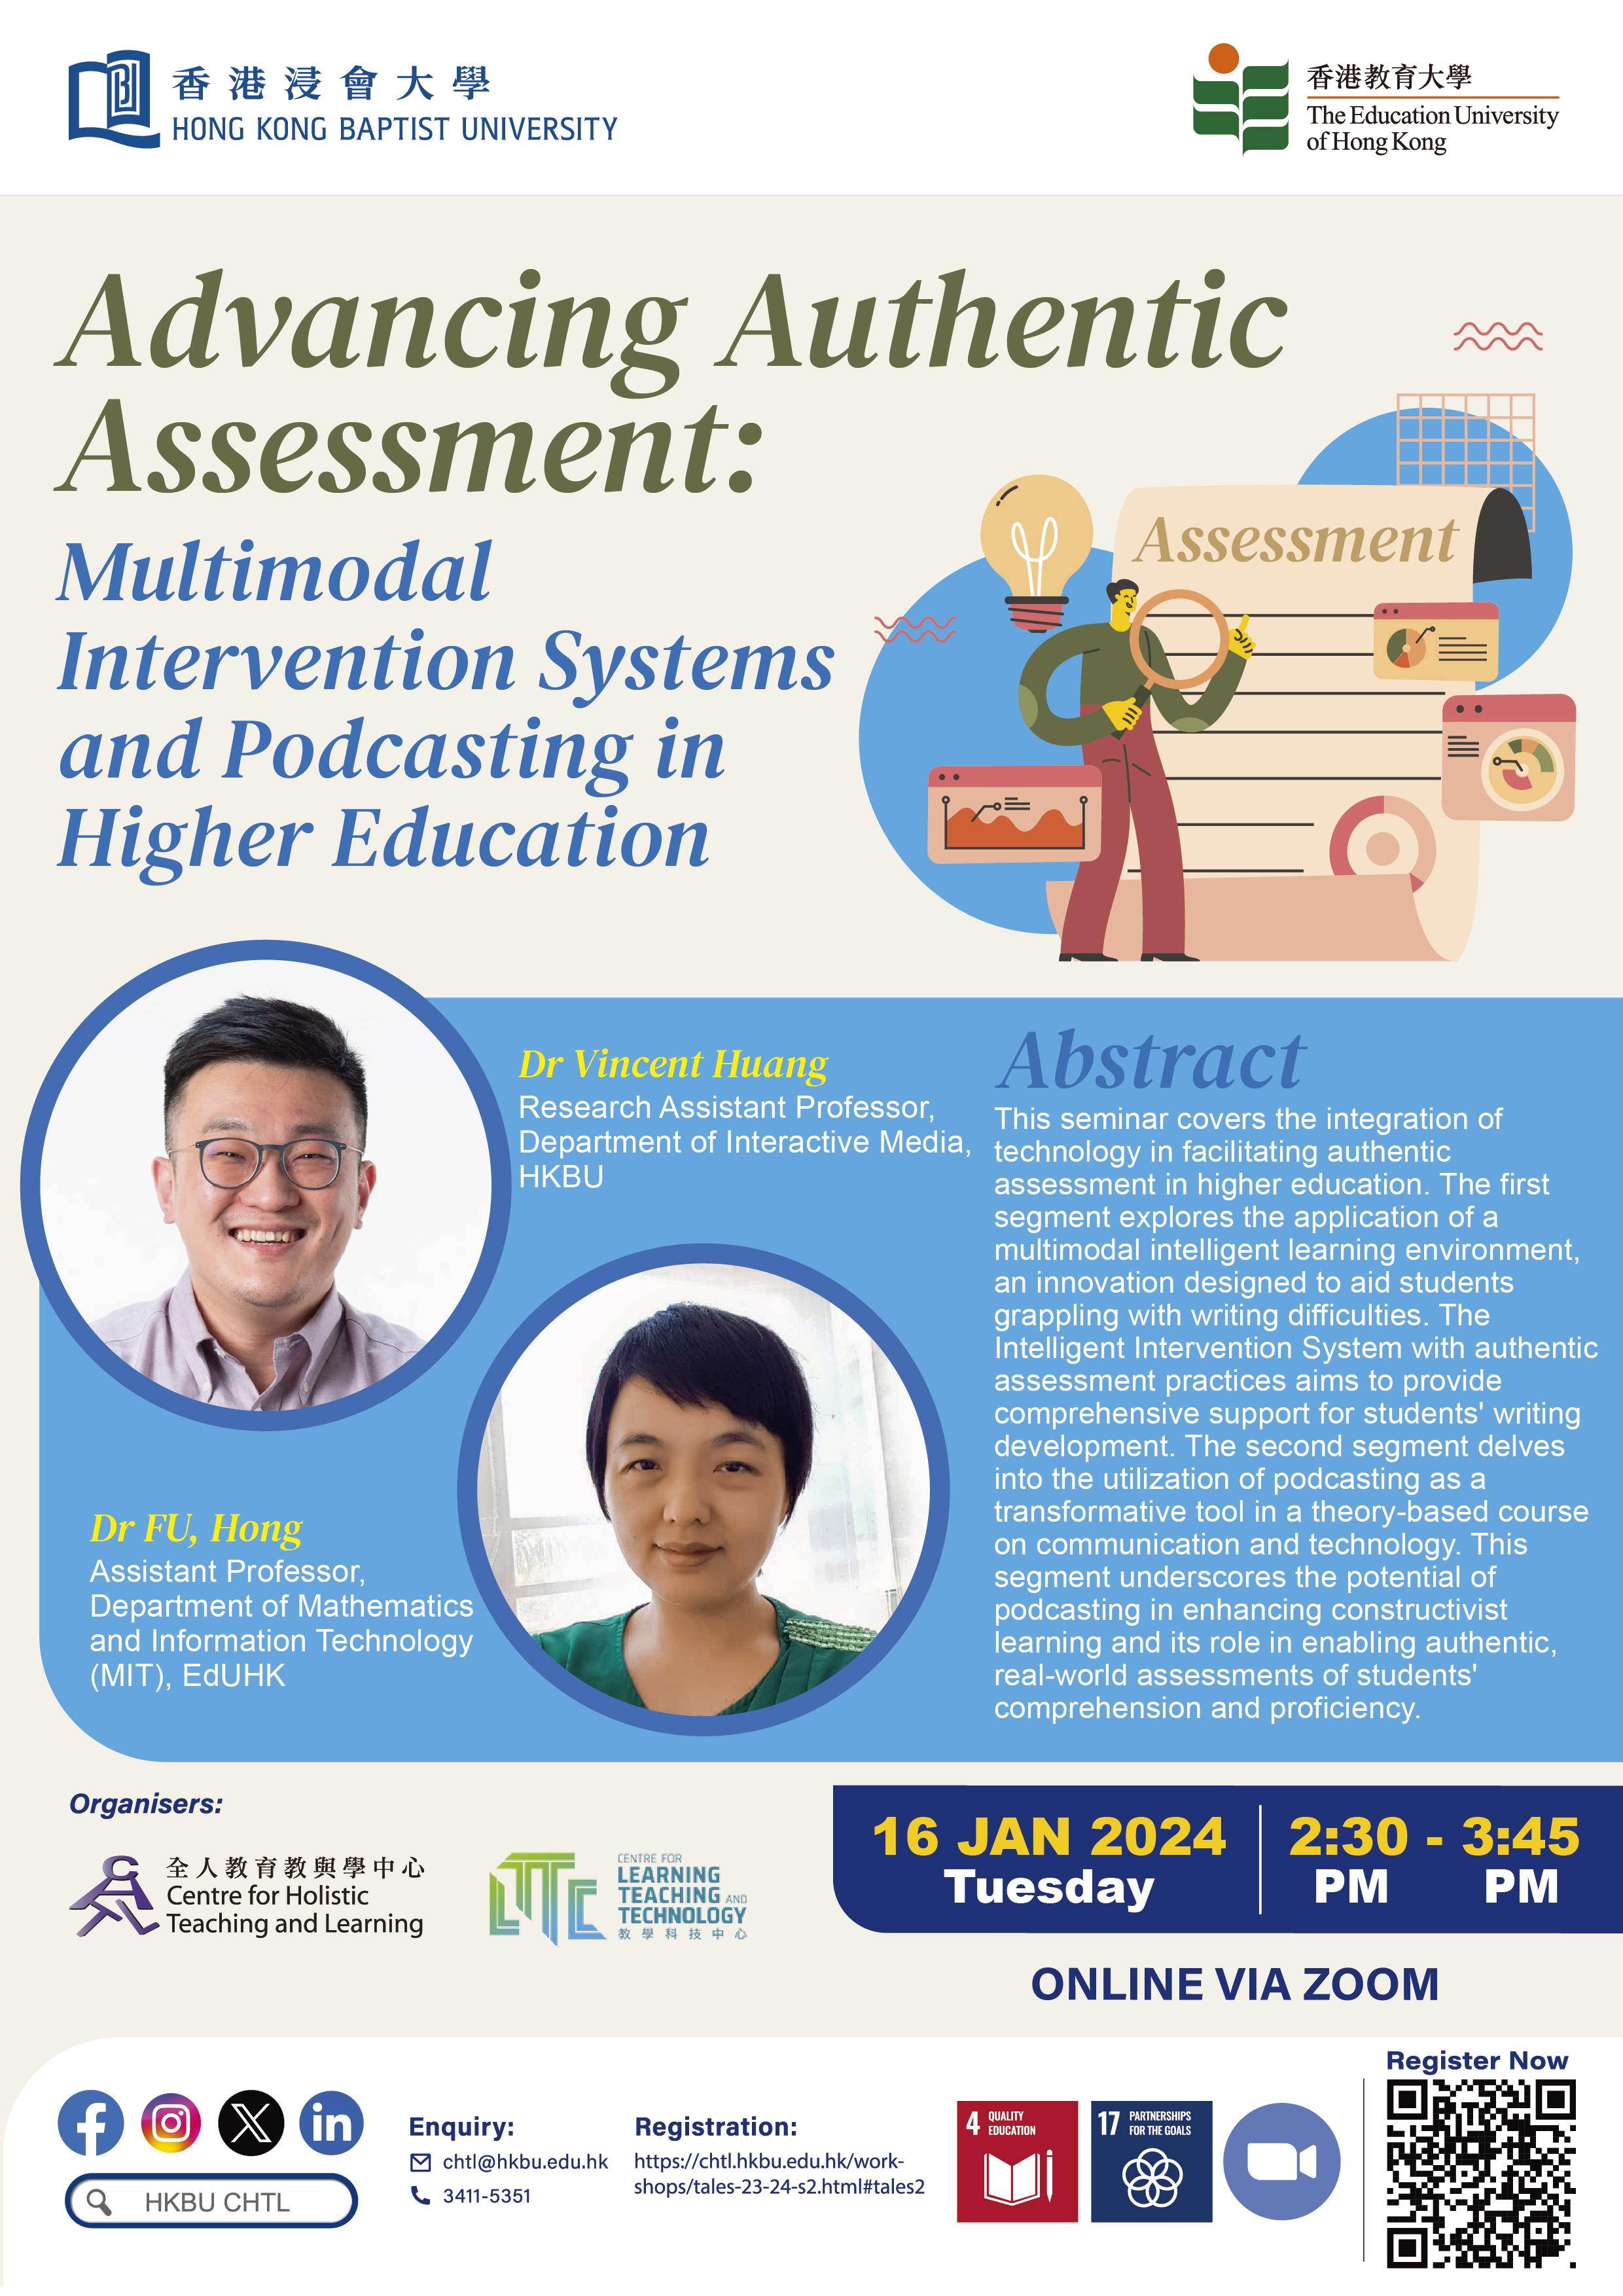 Advancing Authentic Assessment: Multimodal Intervention Systems and Podcasting in Higher Education